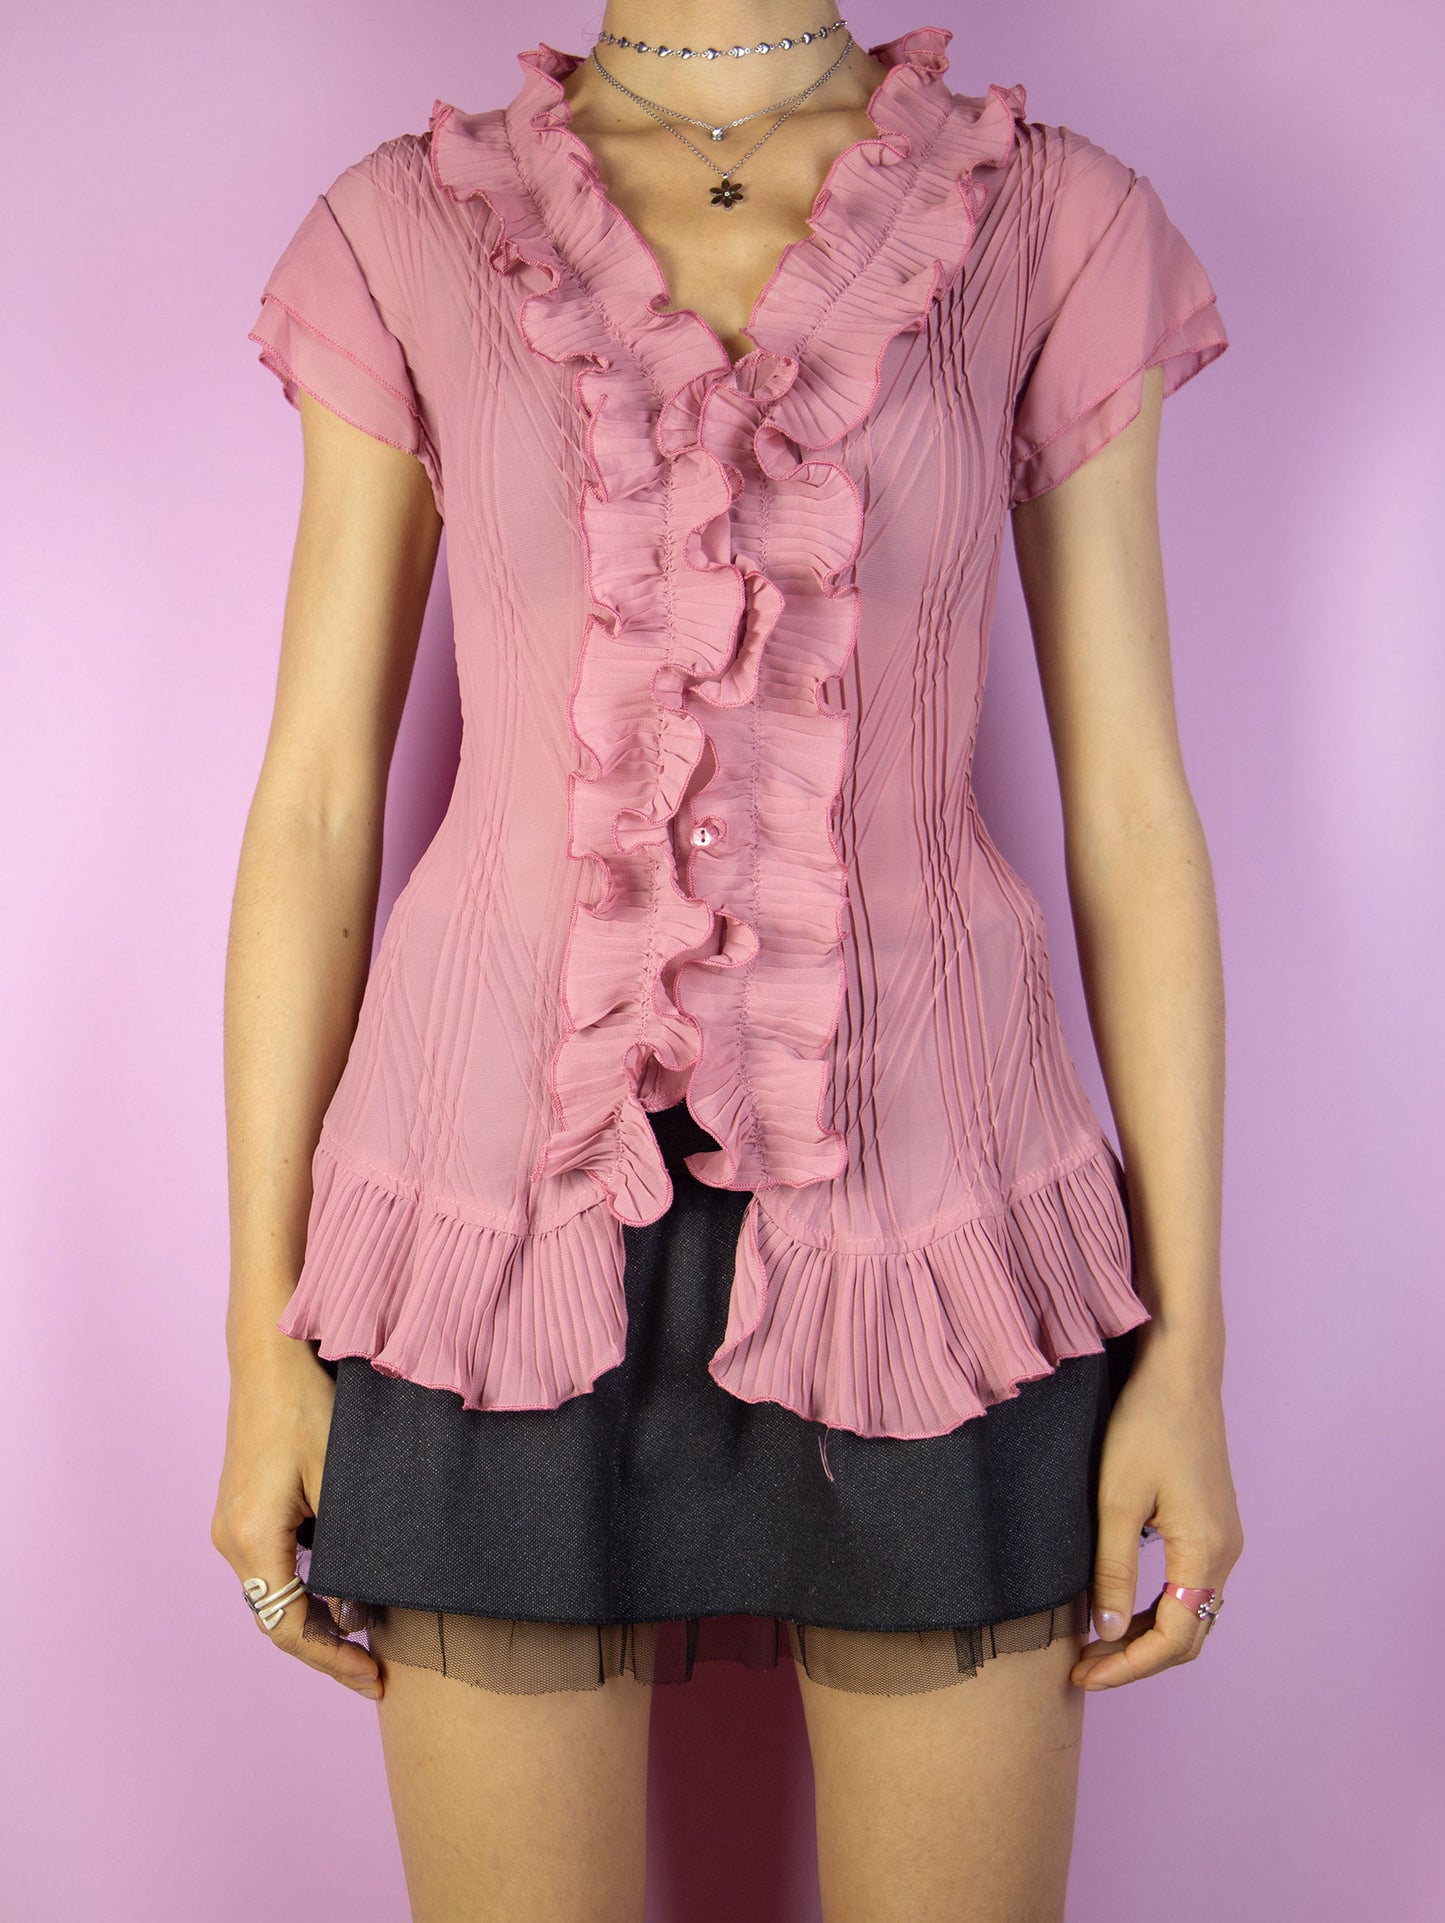 The Vintage 90s Pink Ruffle Sheer Top is a pink semi-sheer pleated ruffled sleeveless blouse with button closure. Romantic coquette 1990s summer shirt.